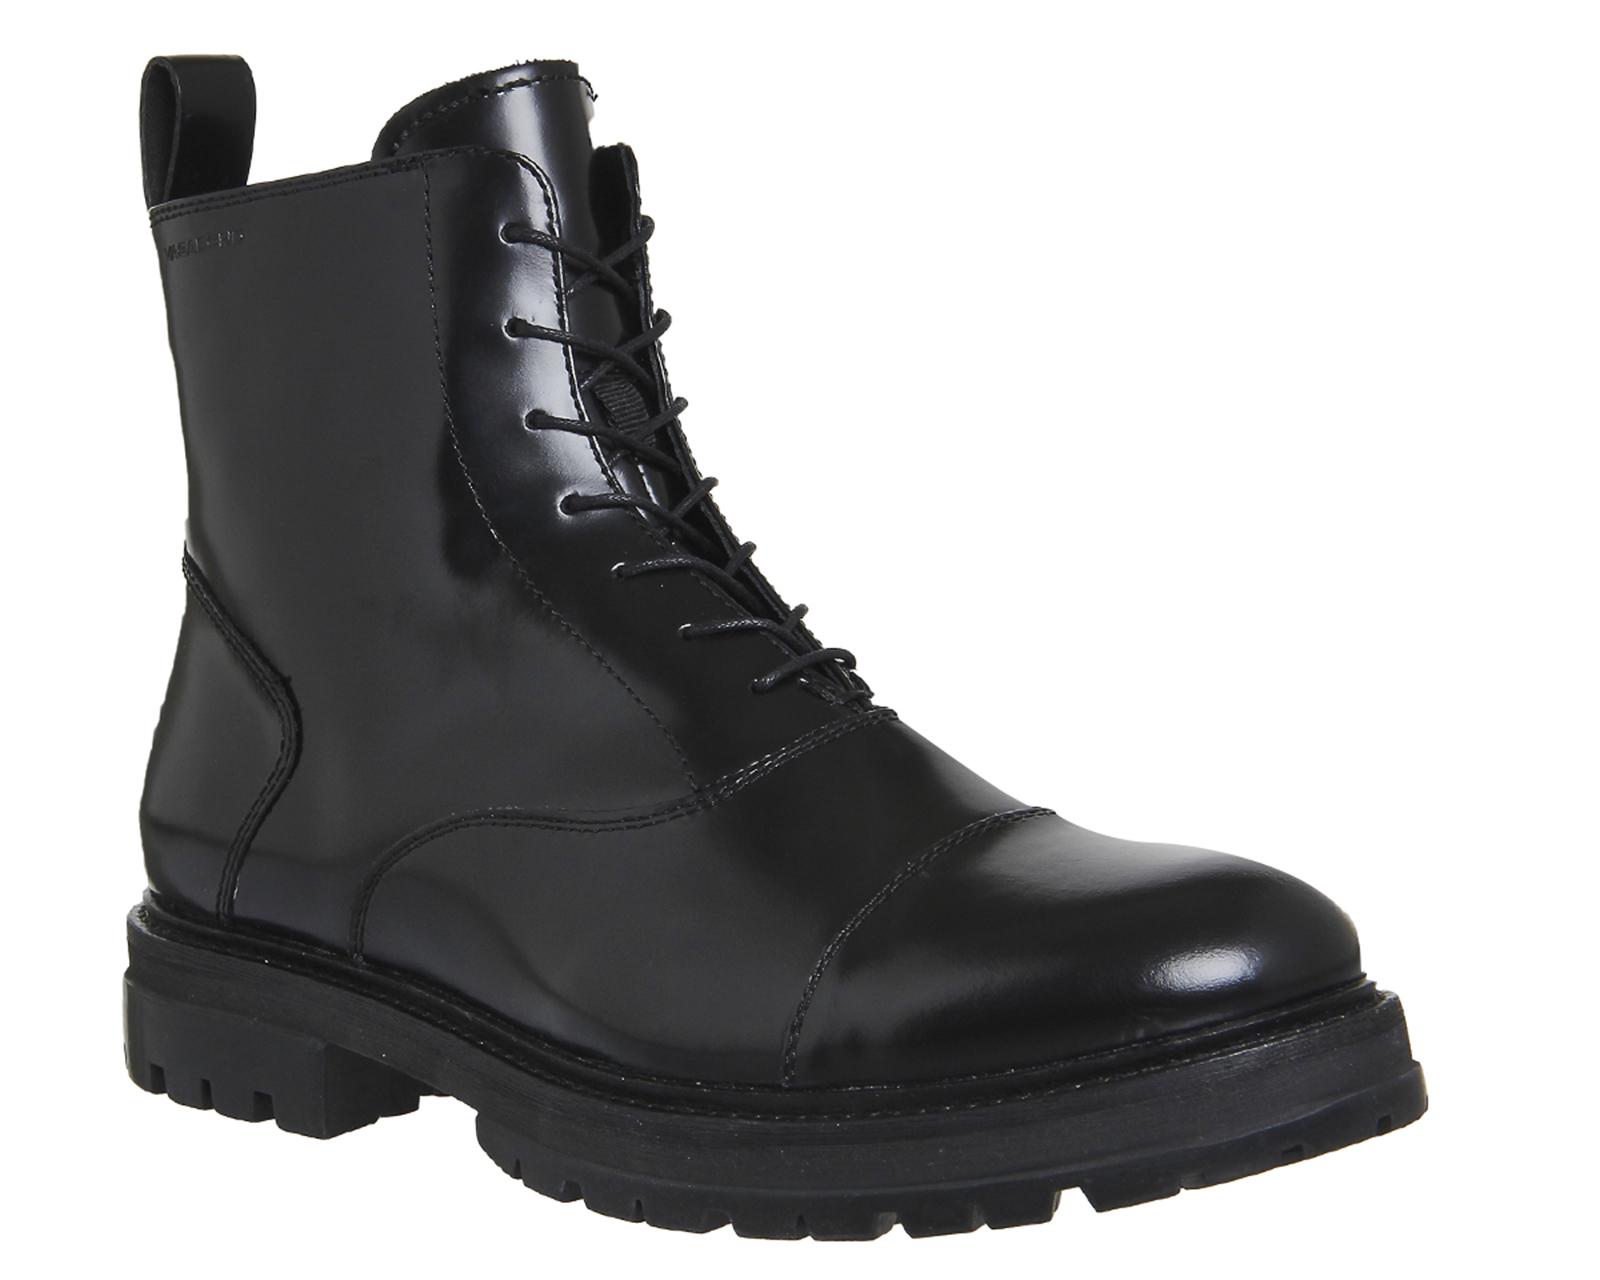 Vagabond Giorgi Lace Up Boots in Black for Men - Lyst